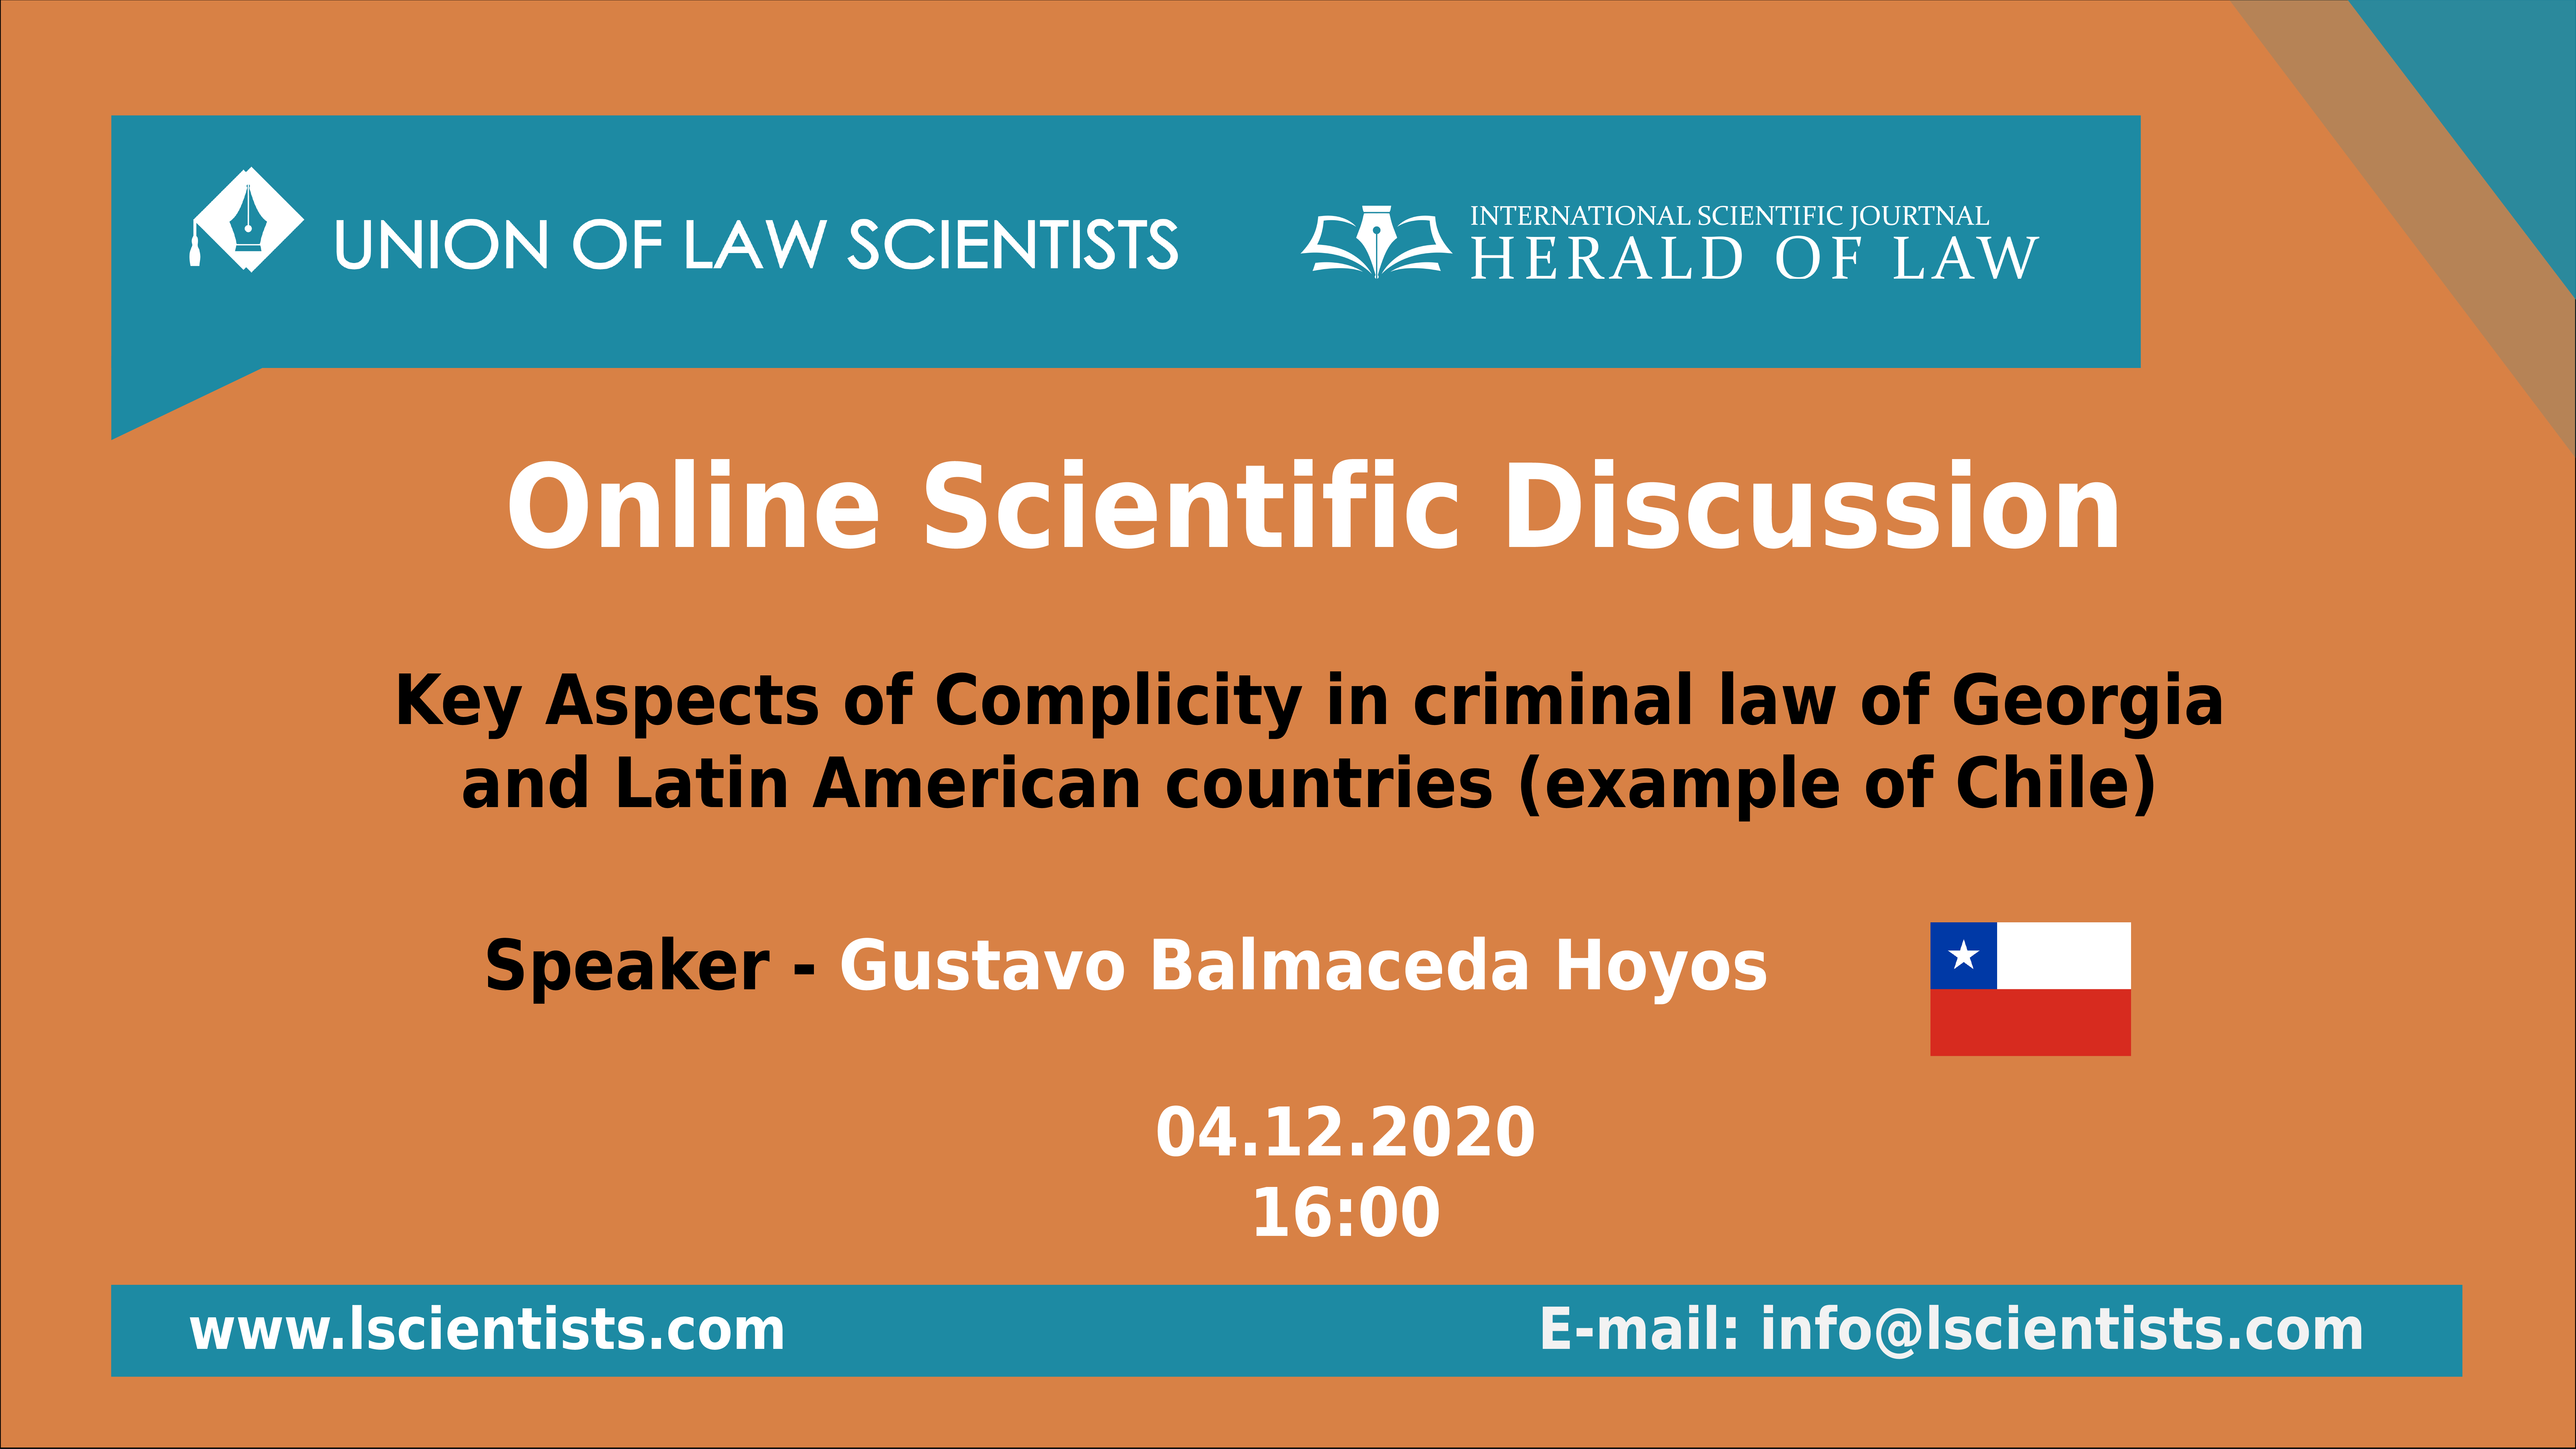 Invitation to scientific discussion “Key Aspects of Complicity in criminal law of Georgian and Latin American countries (example of Chile)”